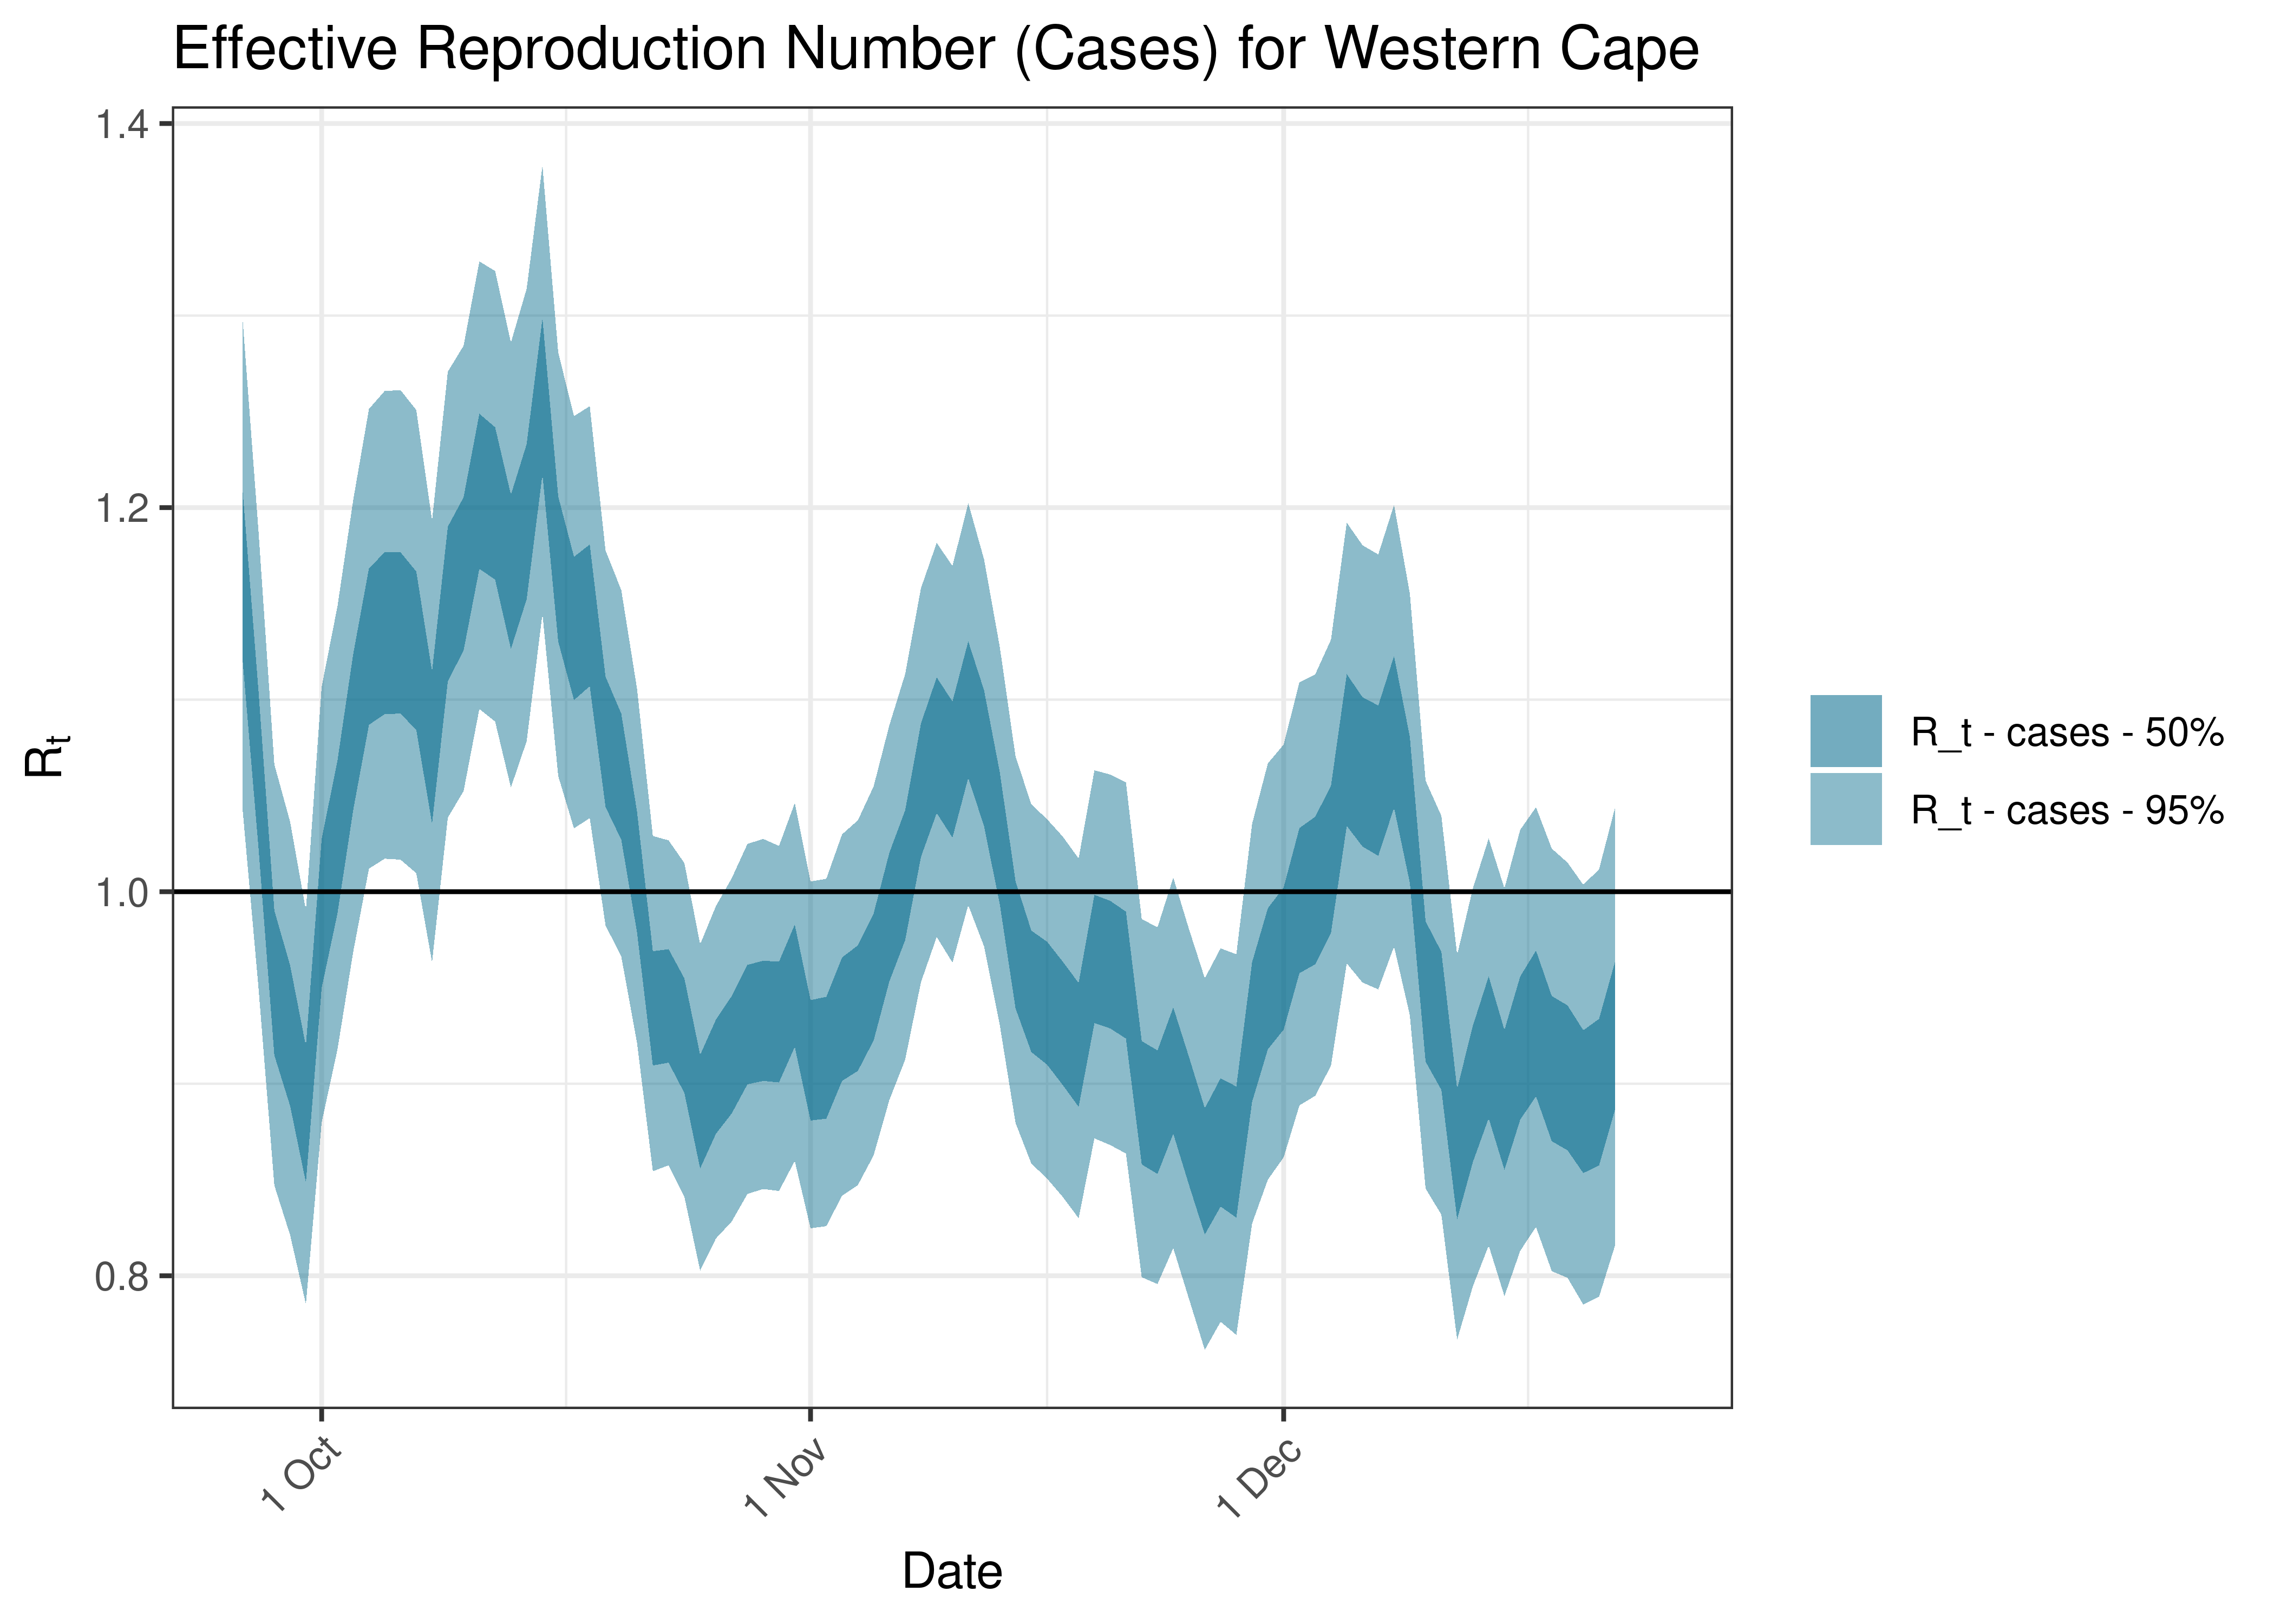 Estimated Effective Reproduction Number Based on Cases for Western Cape over last 90 days